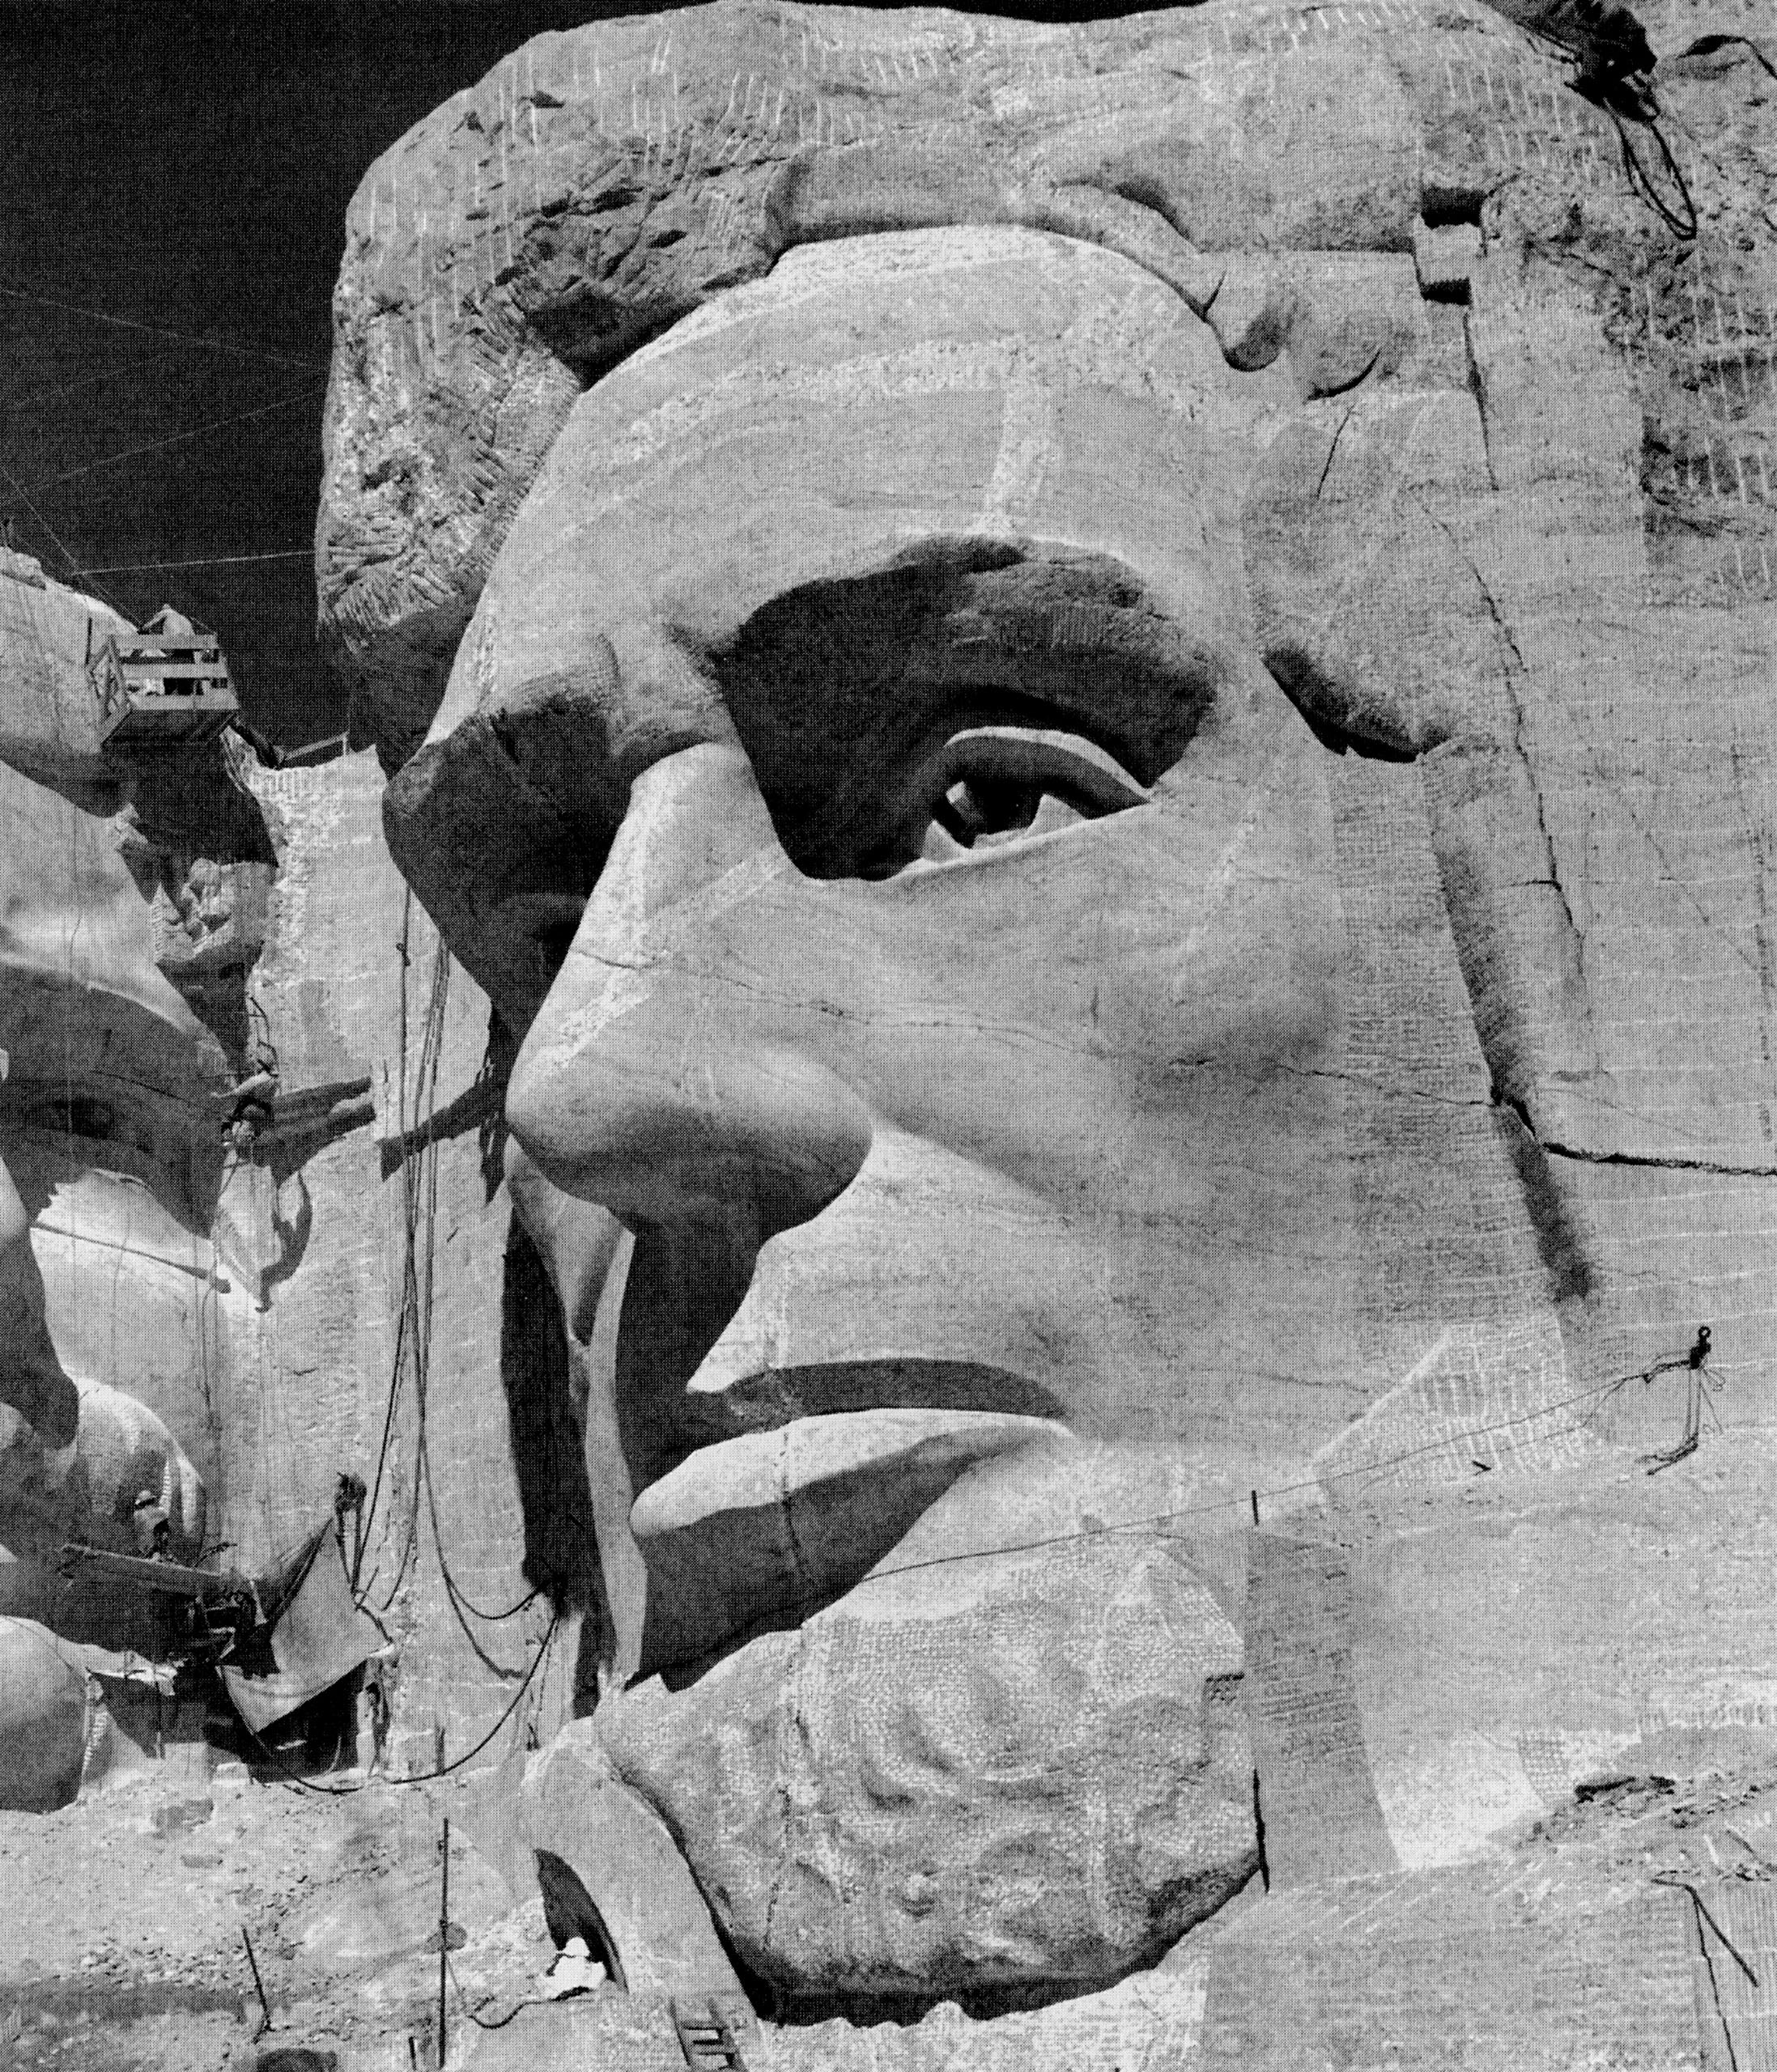 The head of Abraham LIncoln under construction, c. 1930s.